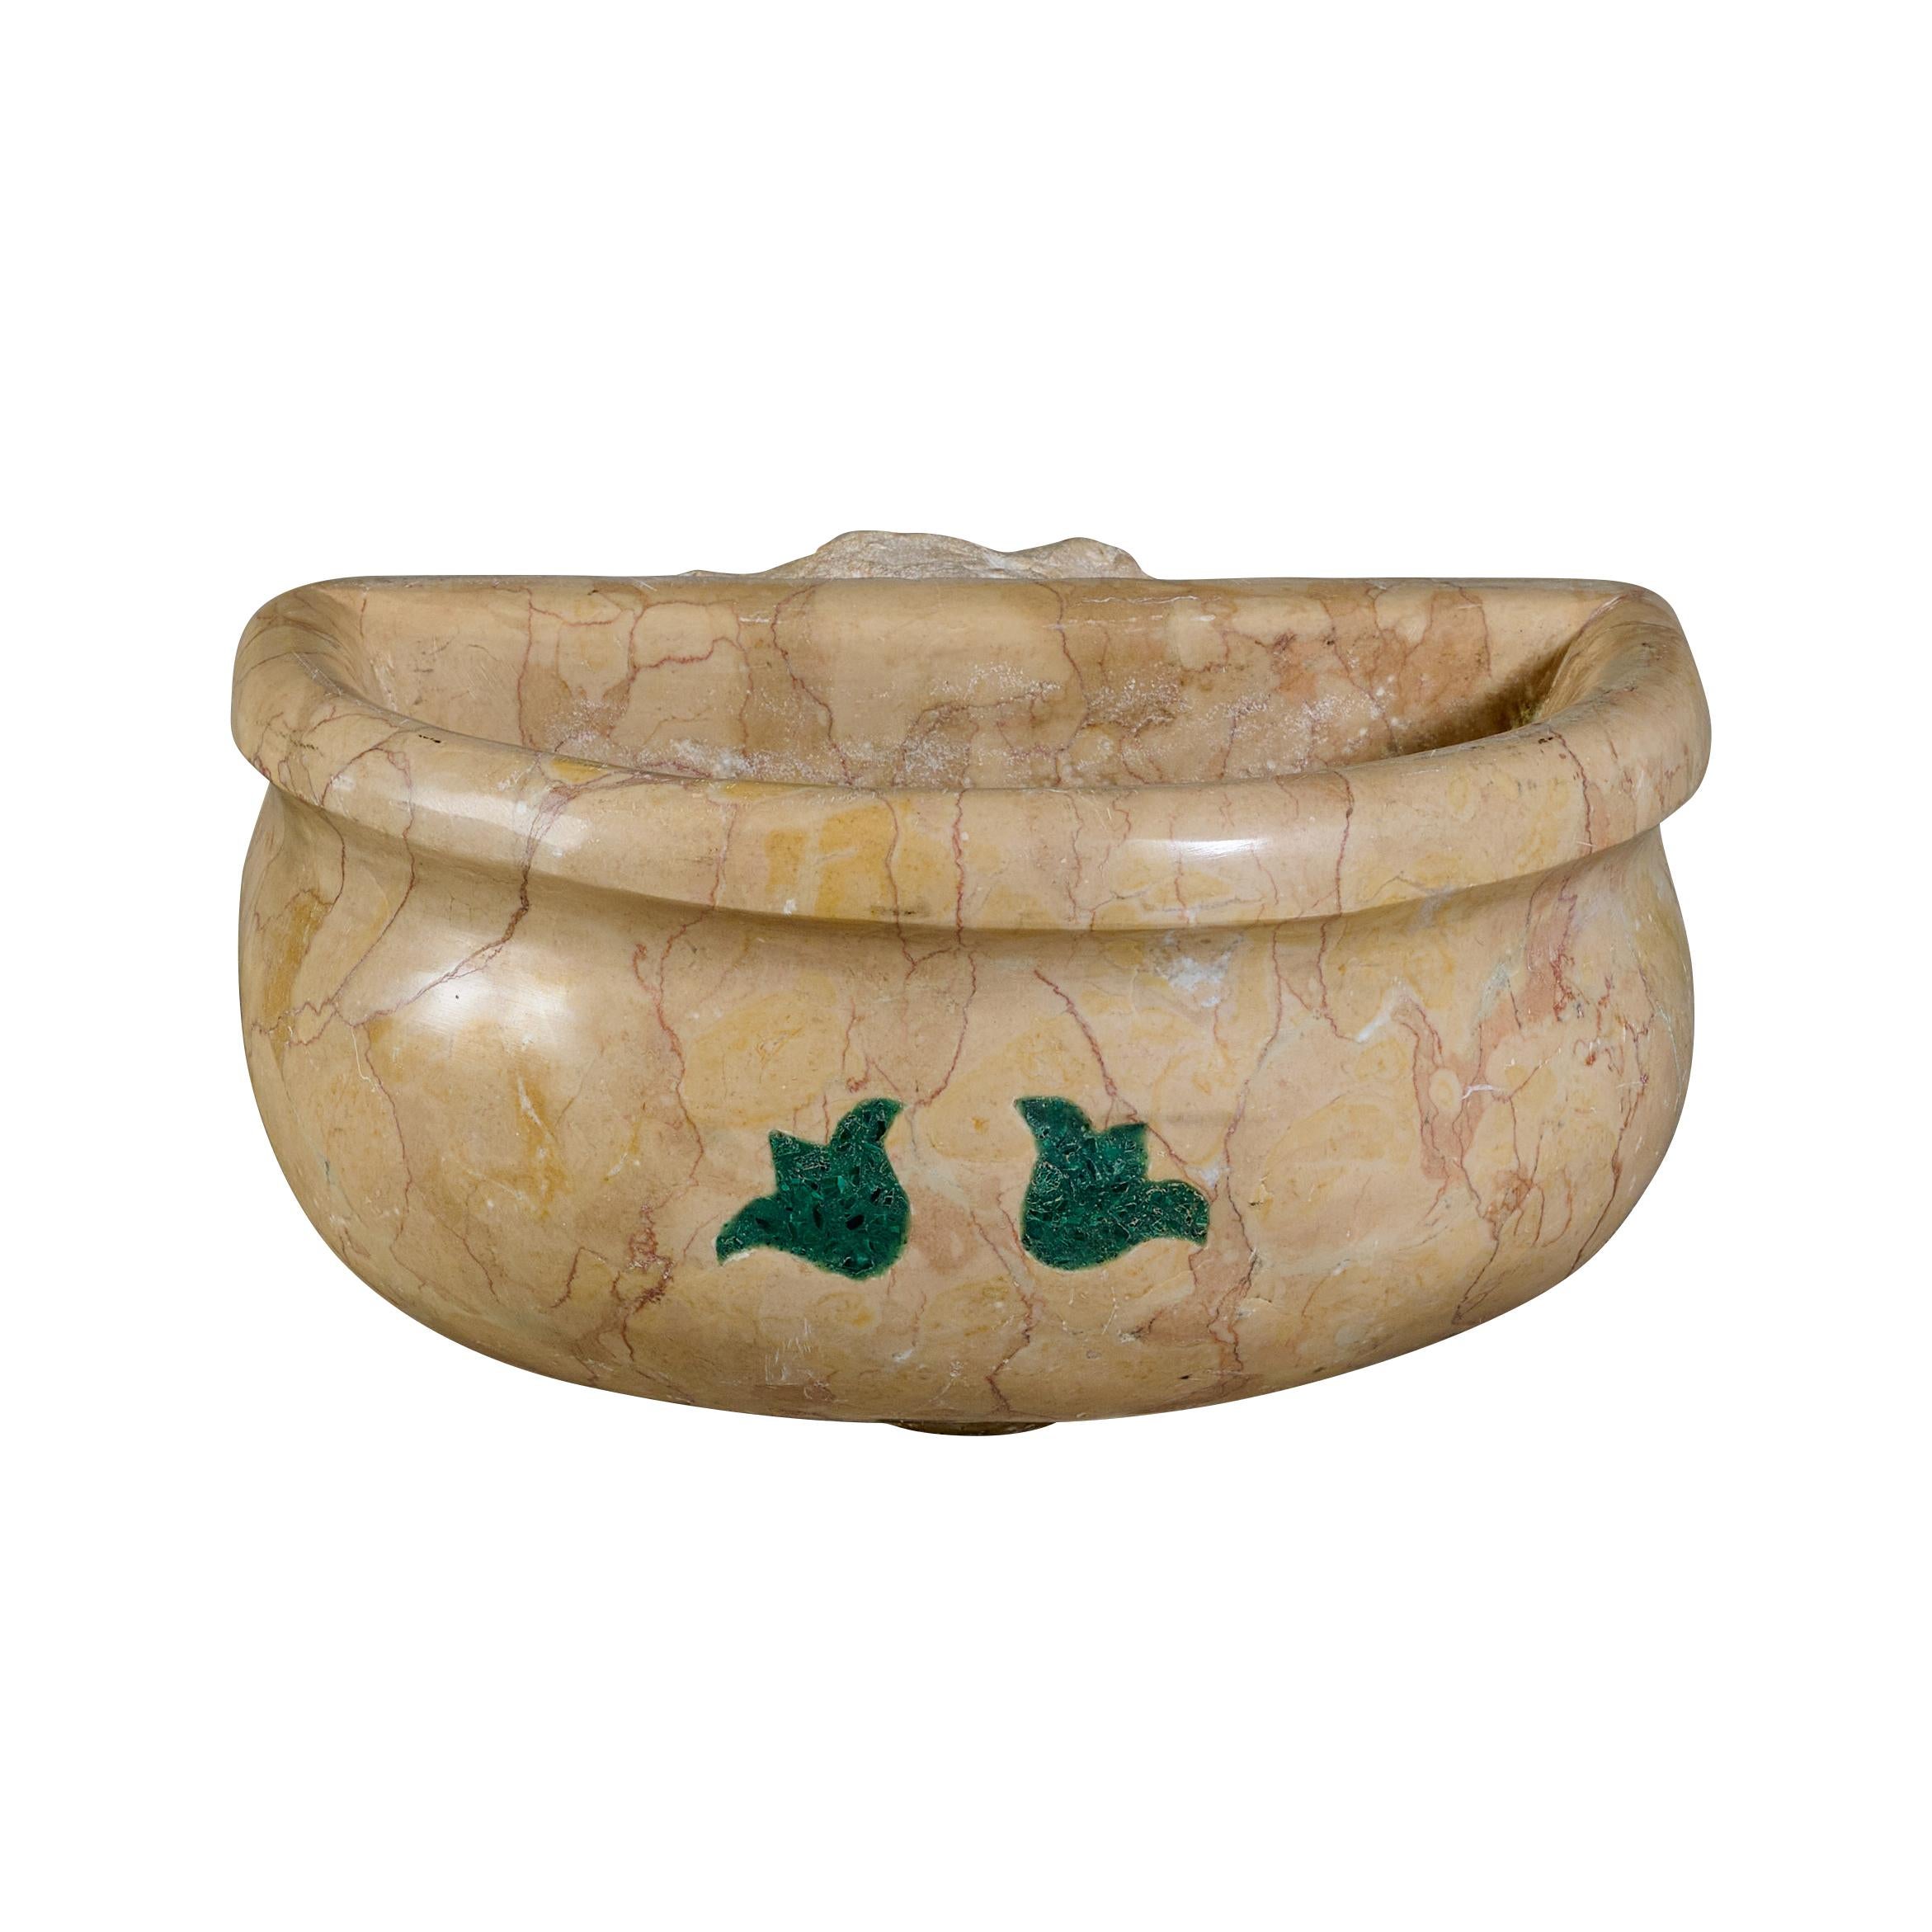 Holy water vessel with green marble inlay.

